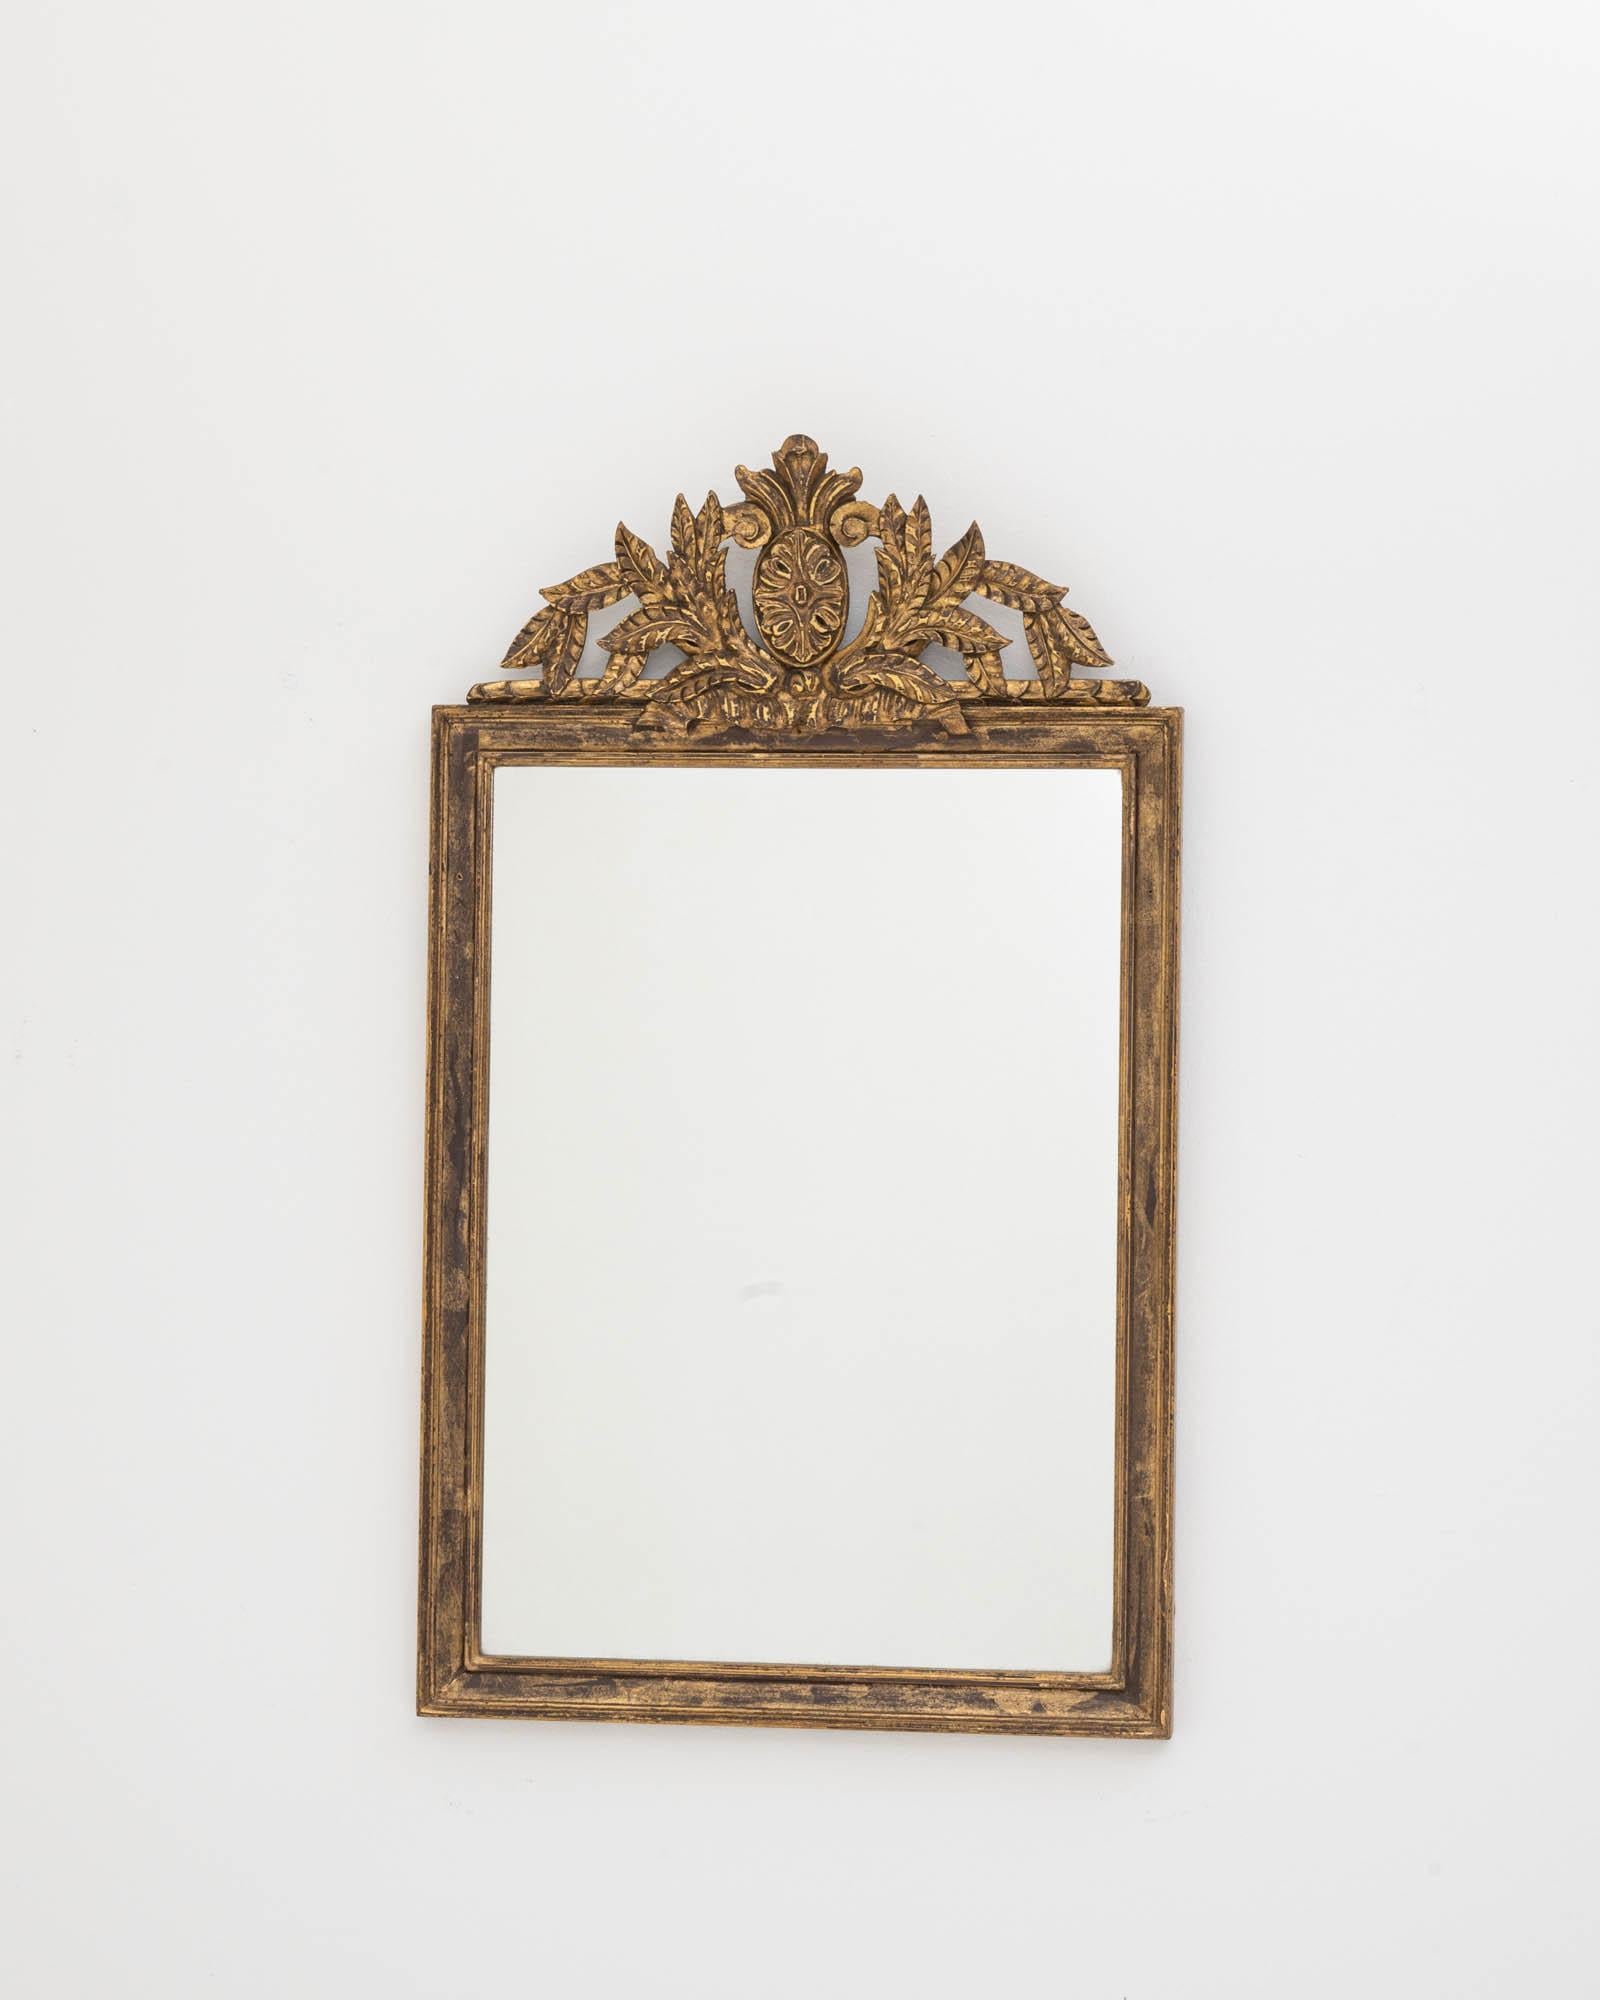 Presenting a magnificent piece of history with this Early 20th Century French Gilded Wood Mirror. Drenched in the splendor of its time, this mirror is an epitome of classic elegance. Its exquisite gilded frame, adorned with intricate foliage and an